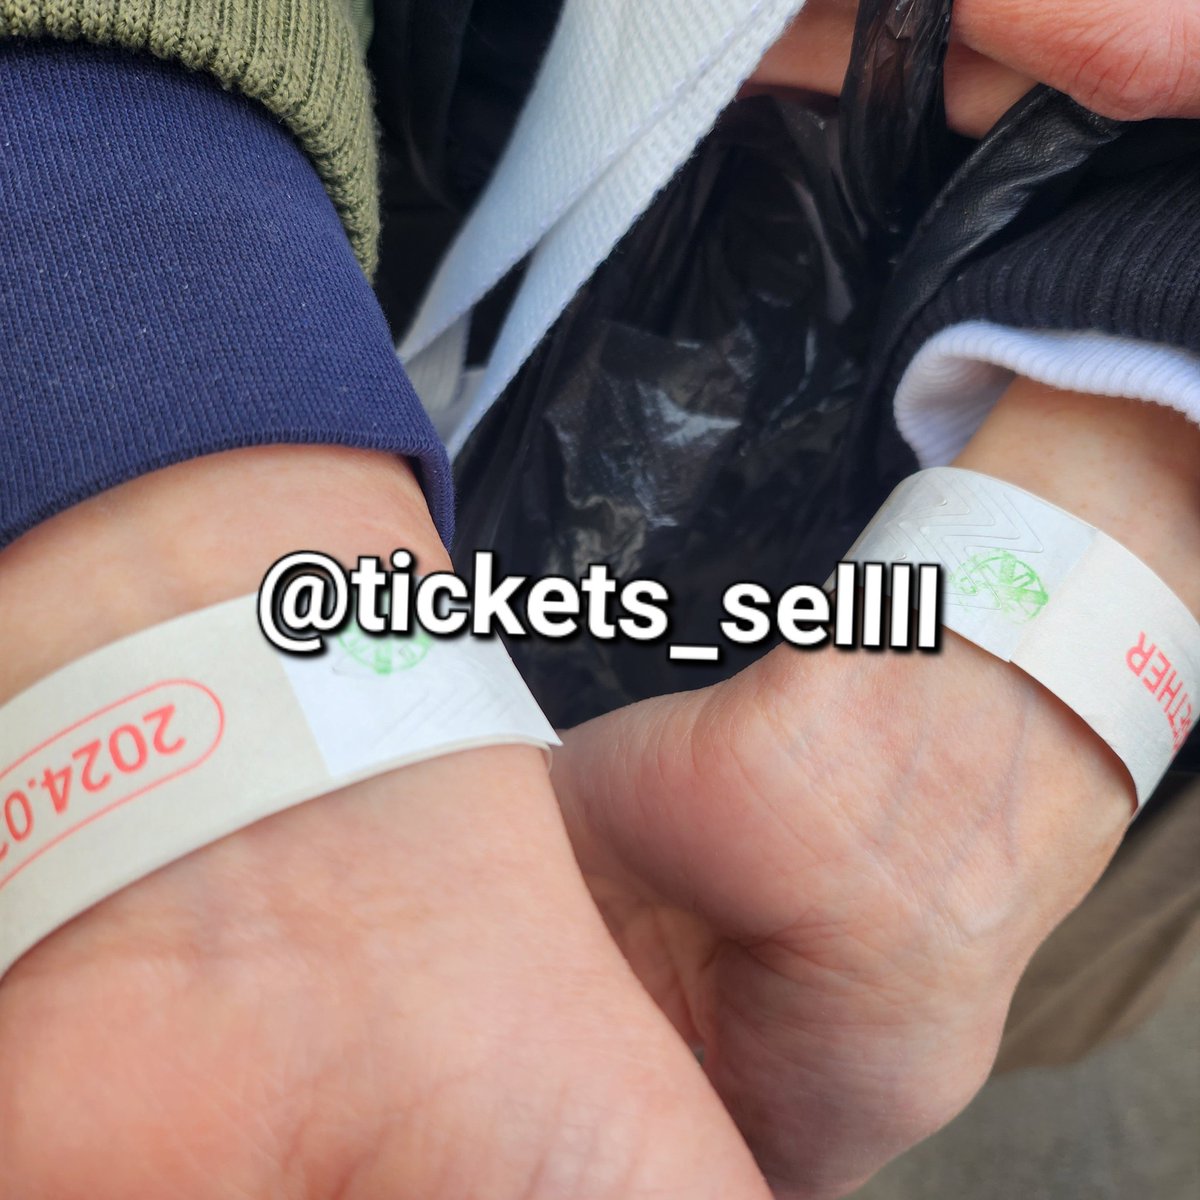 tickets_sellll tweet picture